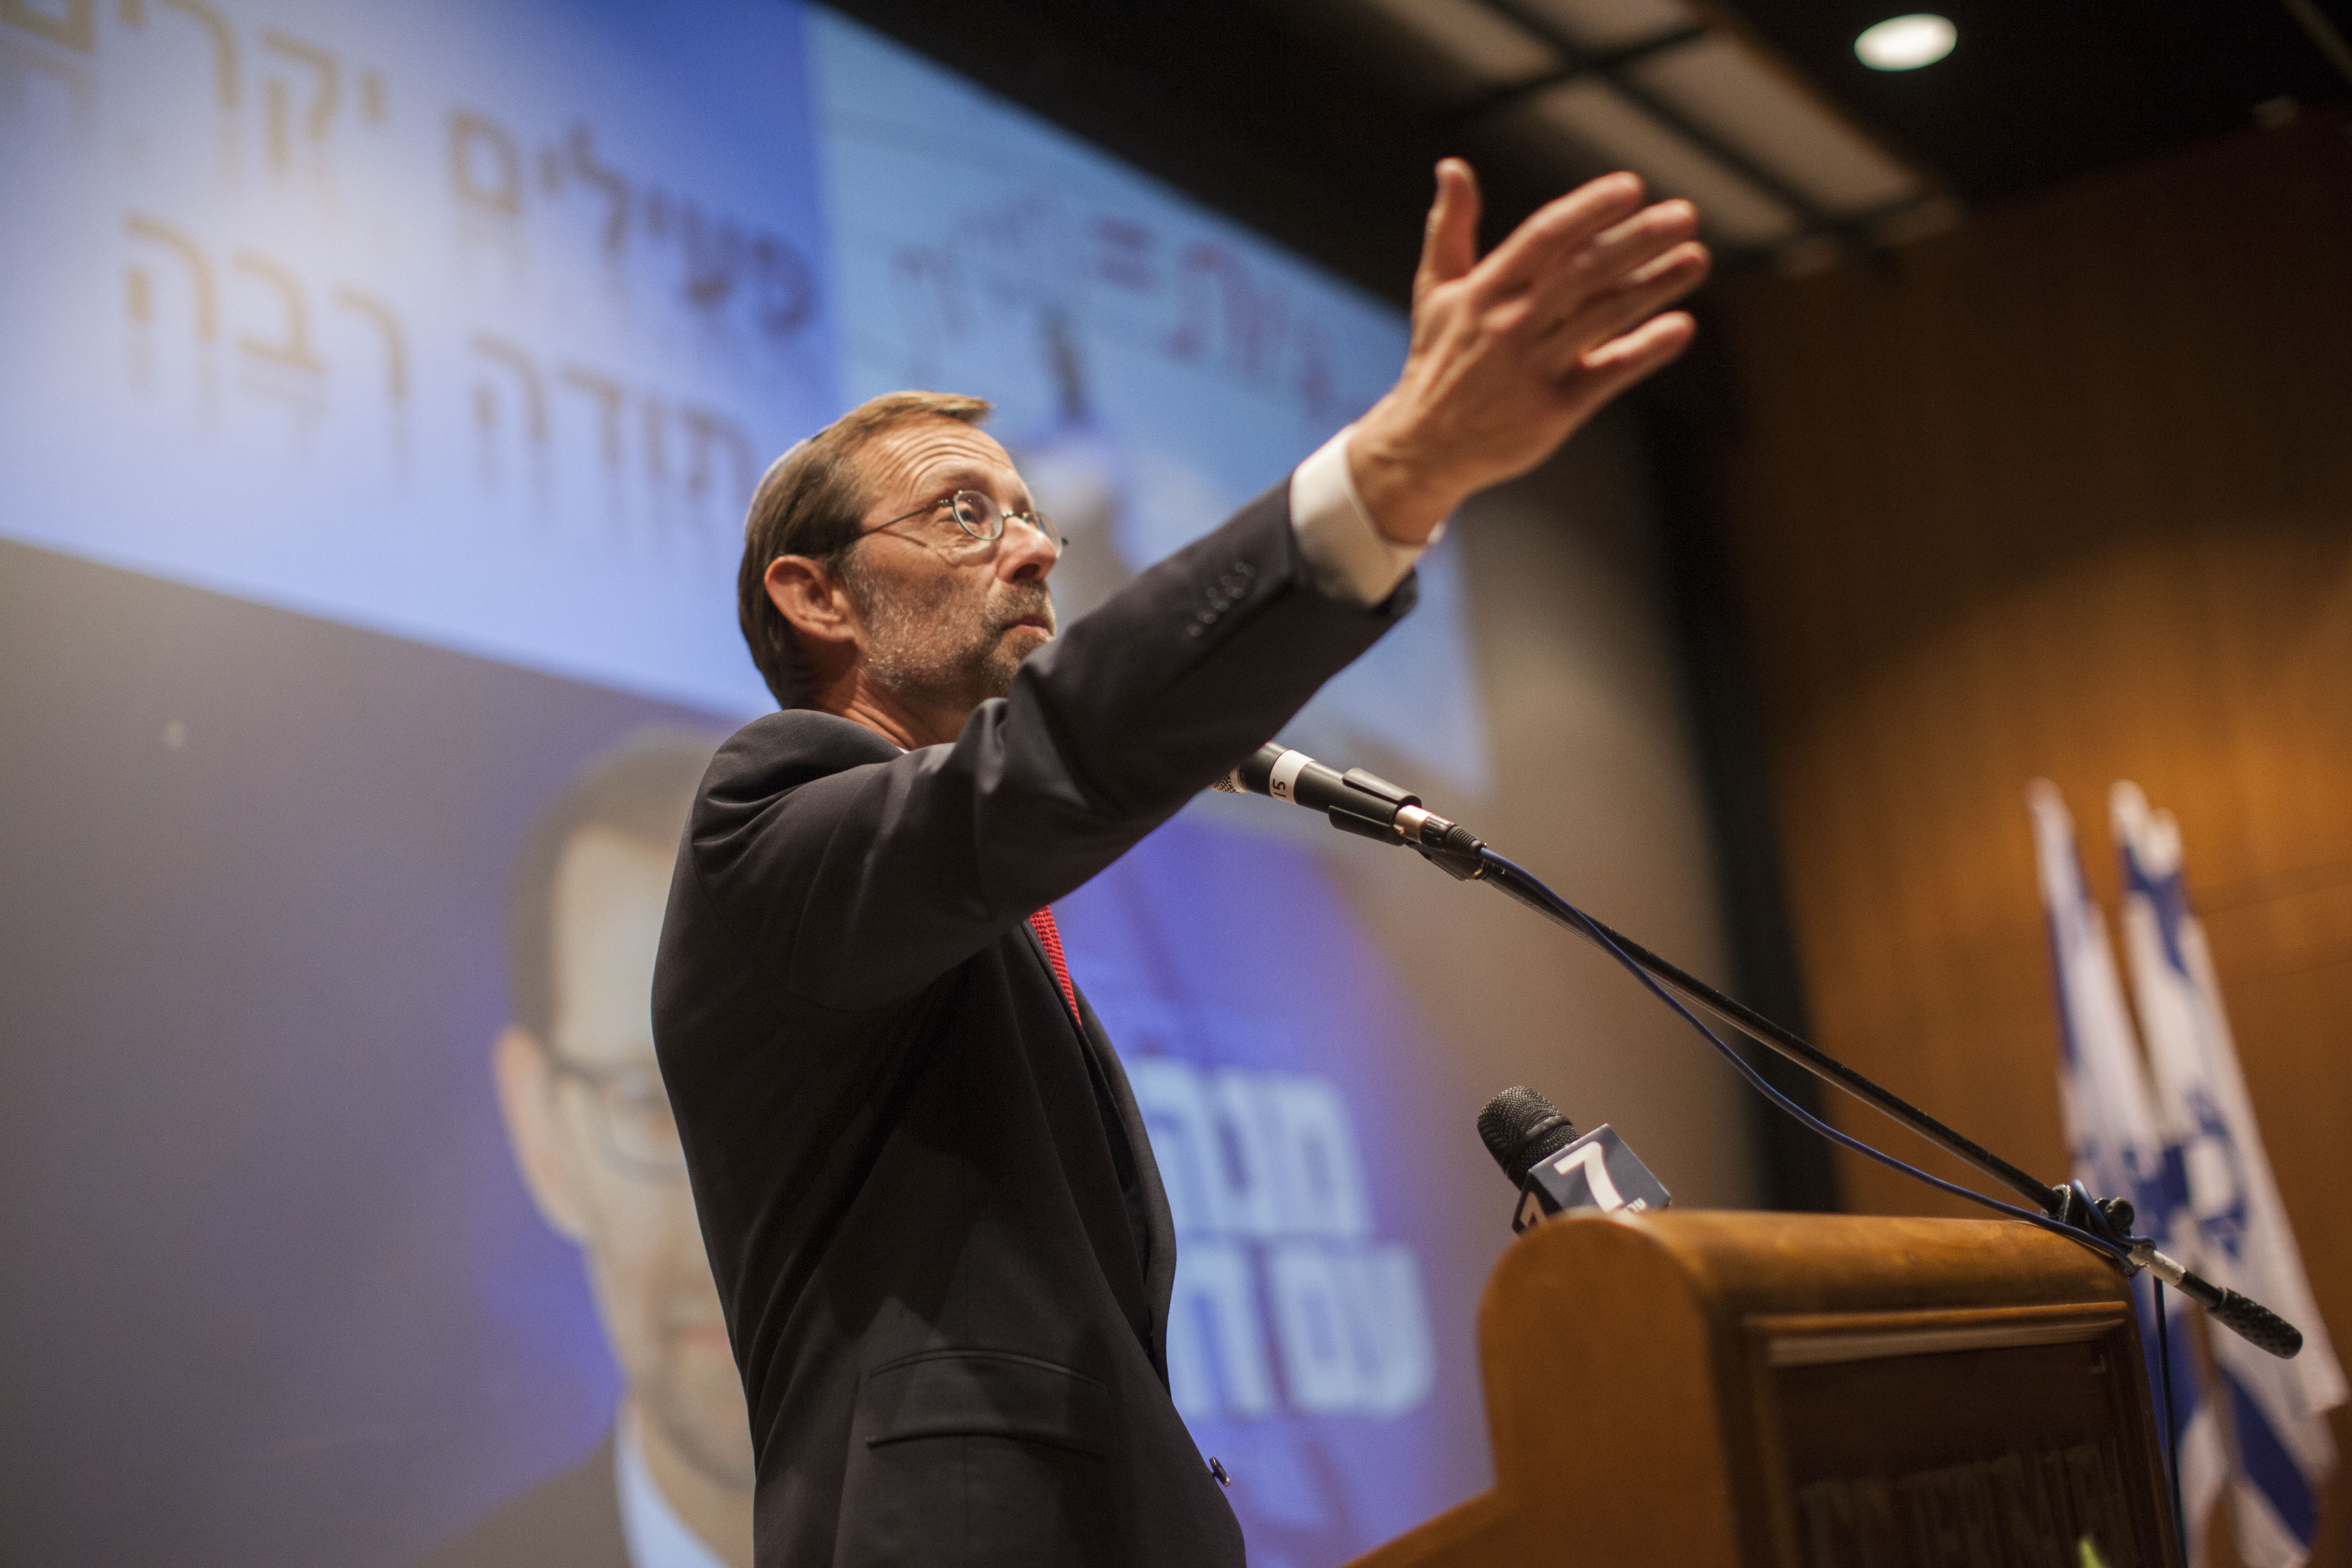 Parliament member Moshe Feiglin speaks to supporters during a conference in Jerusalem convention center on January 5, 2014, Moshe Feiglin announced his departure from the Likud Monday at a conference with his supporters. Flash90